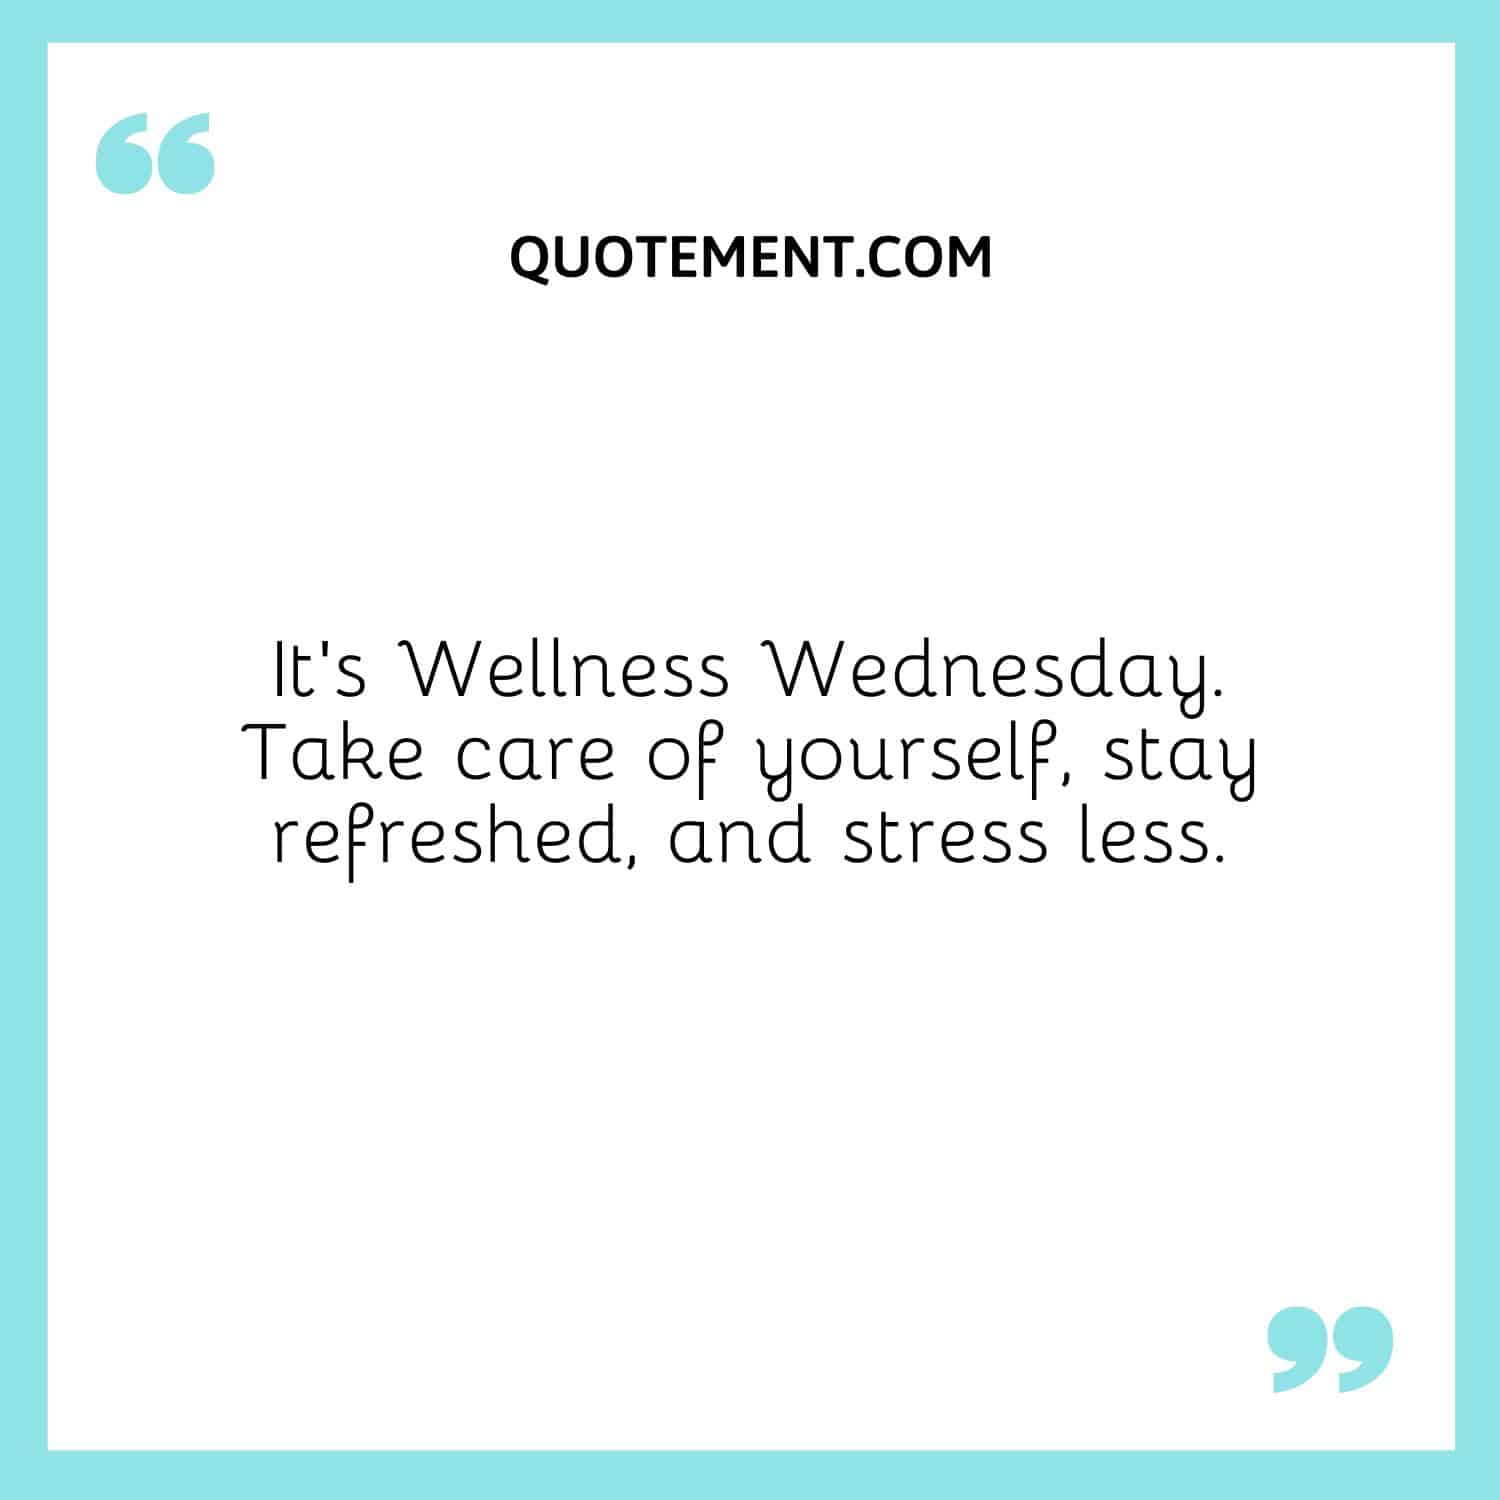 Take care of yourself, stay refreshed, and stress less.